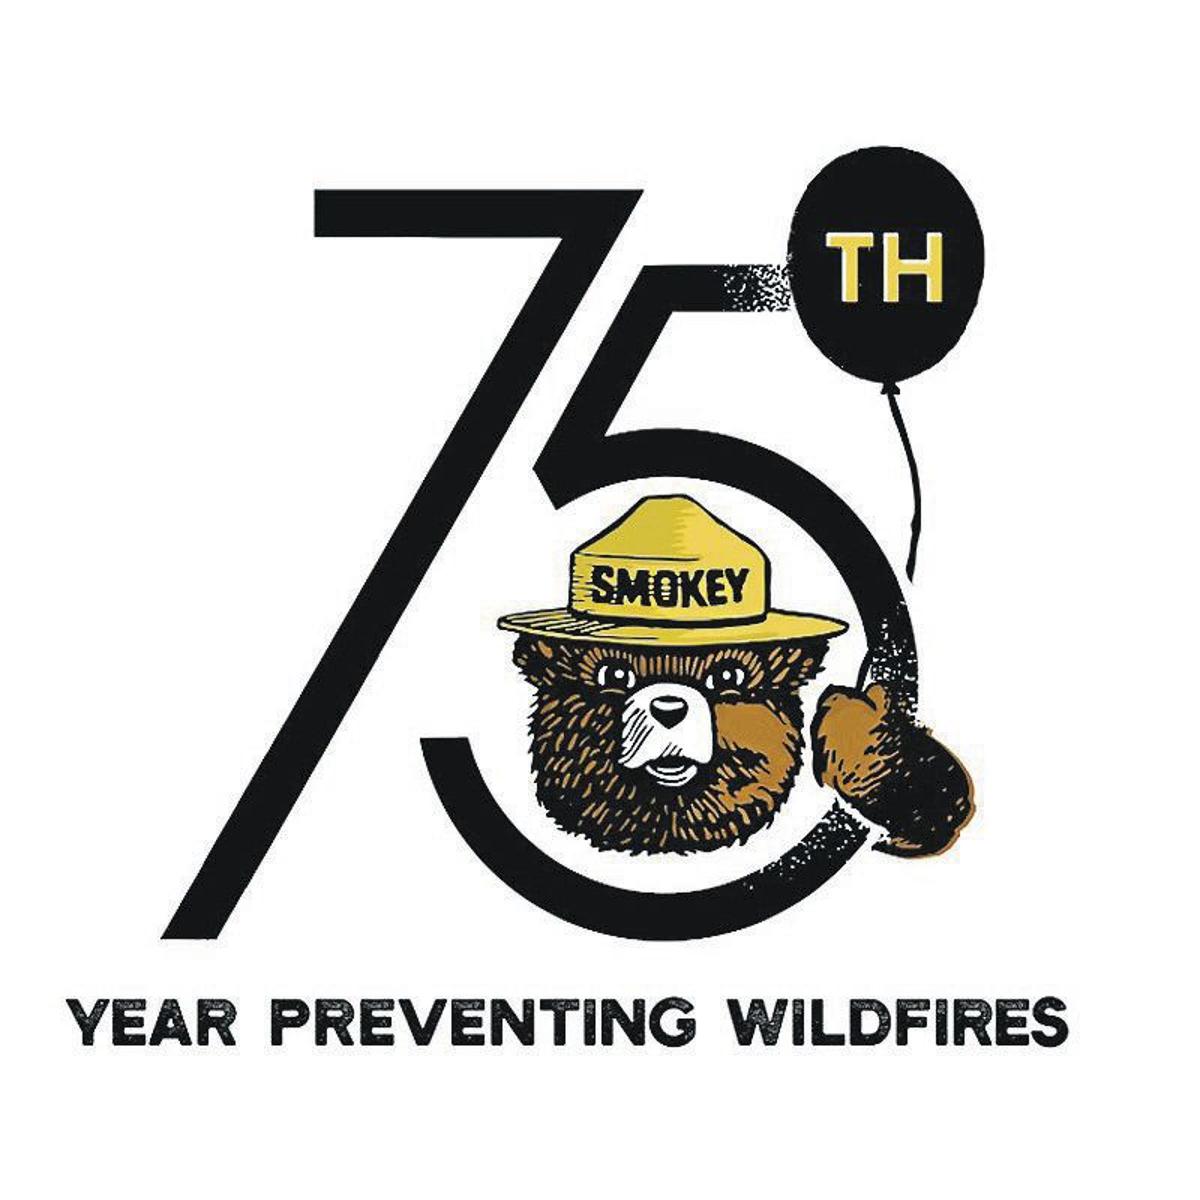 Cradle Of Forestry To Host Smokey Bear S 75th Birthday Party